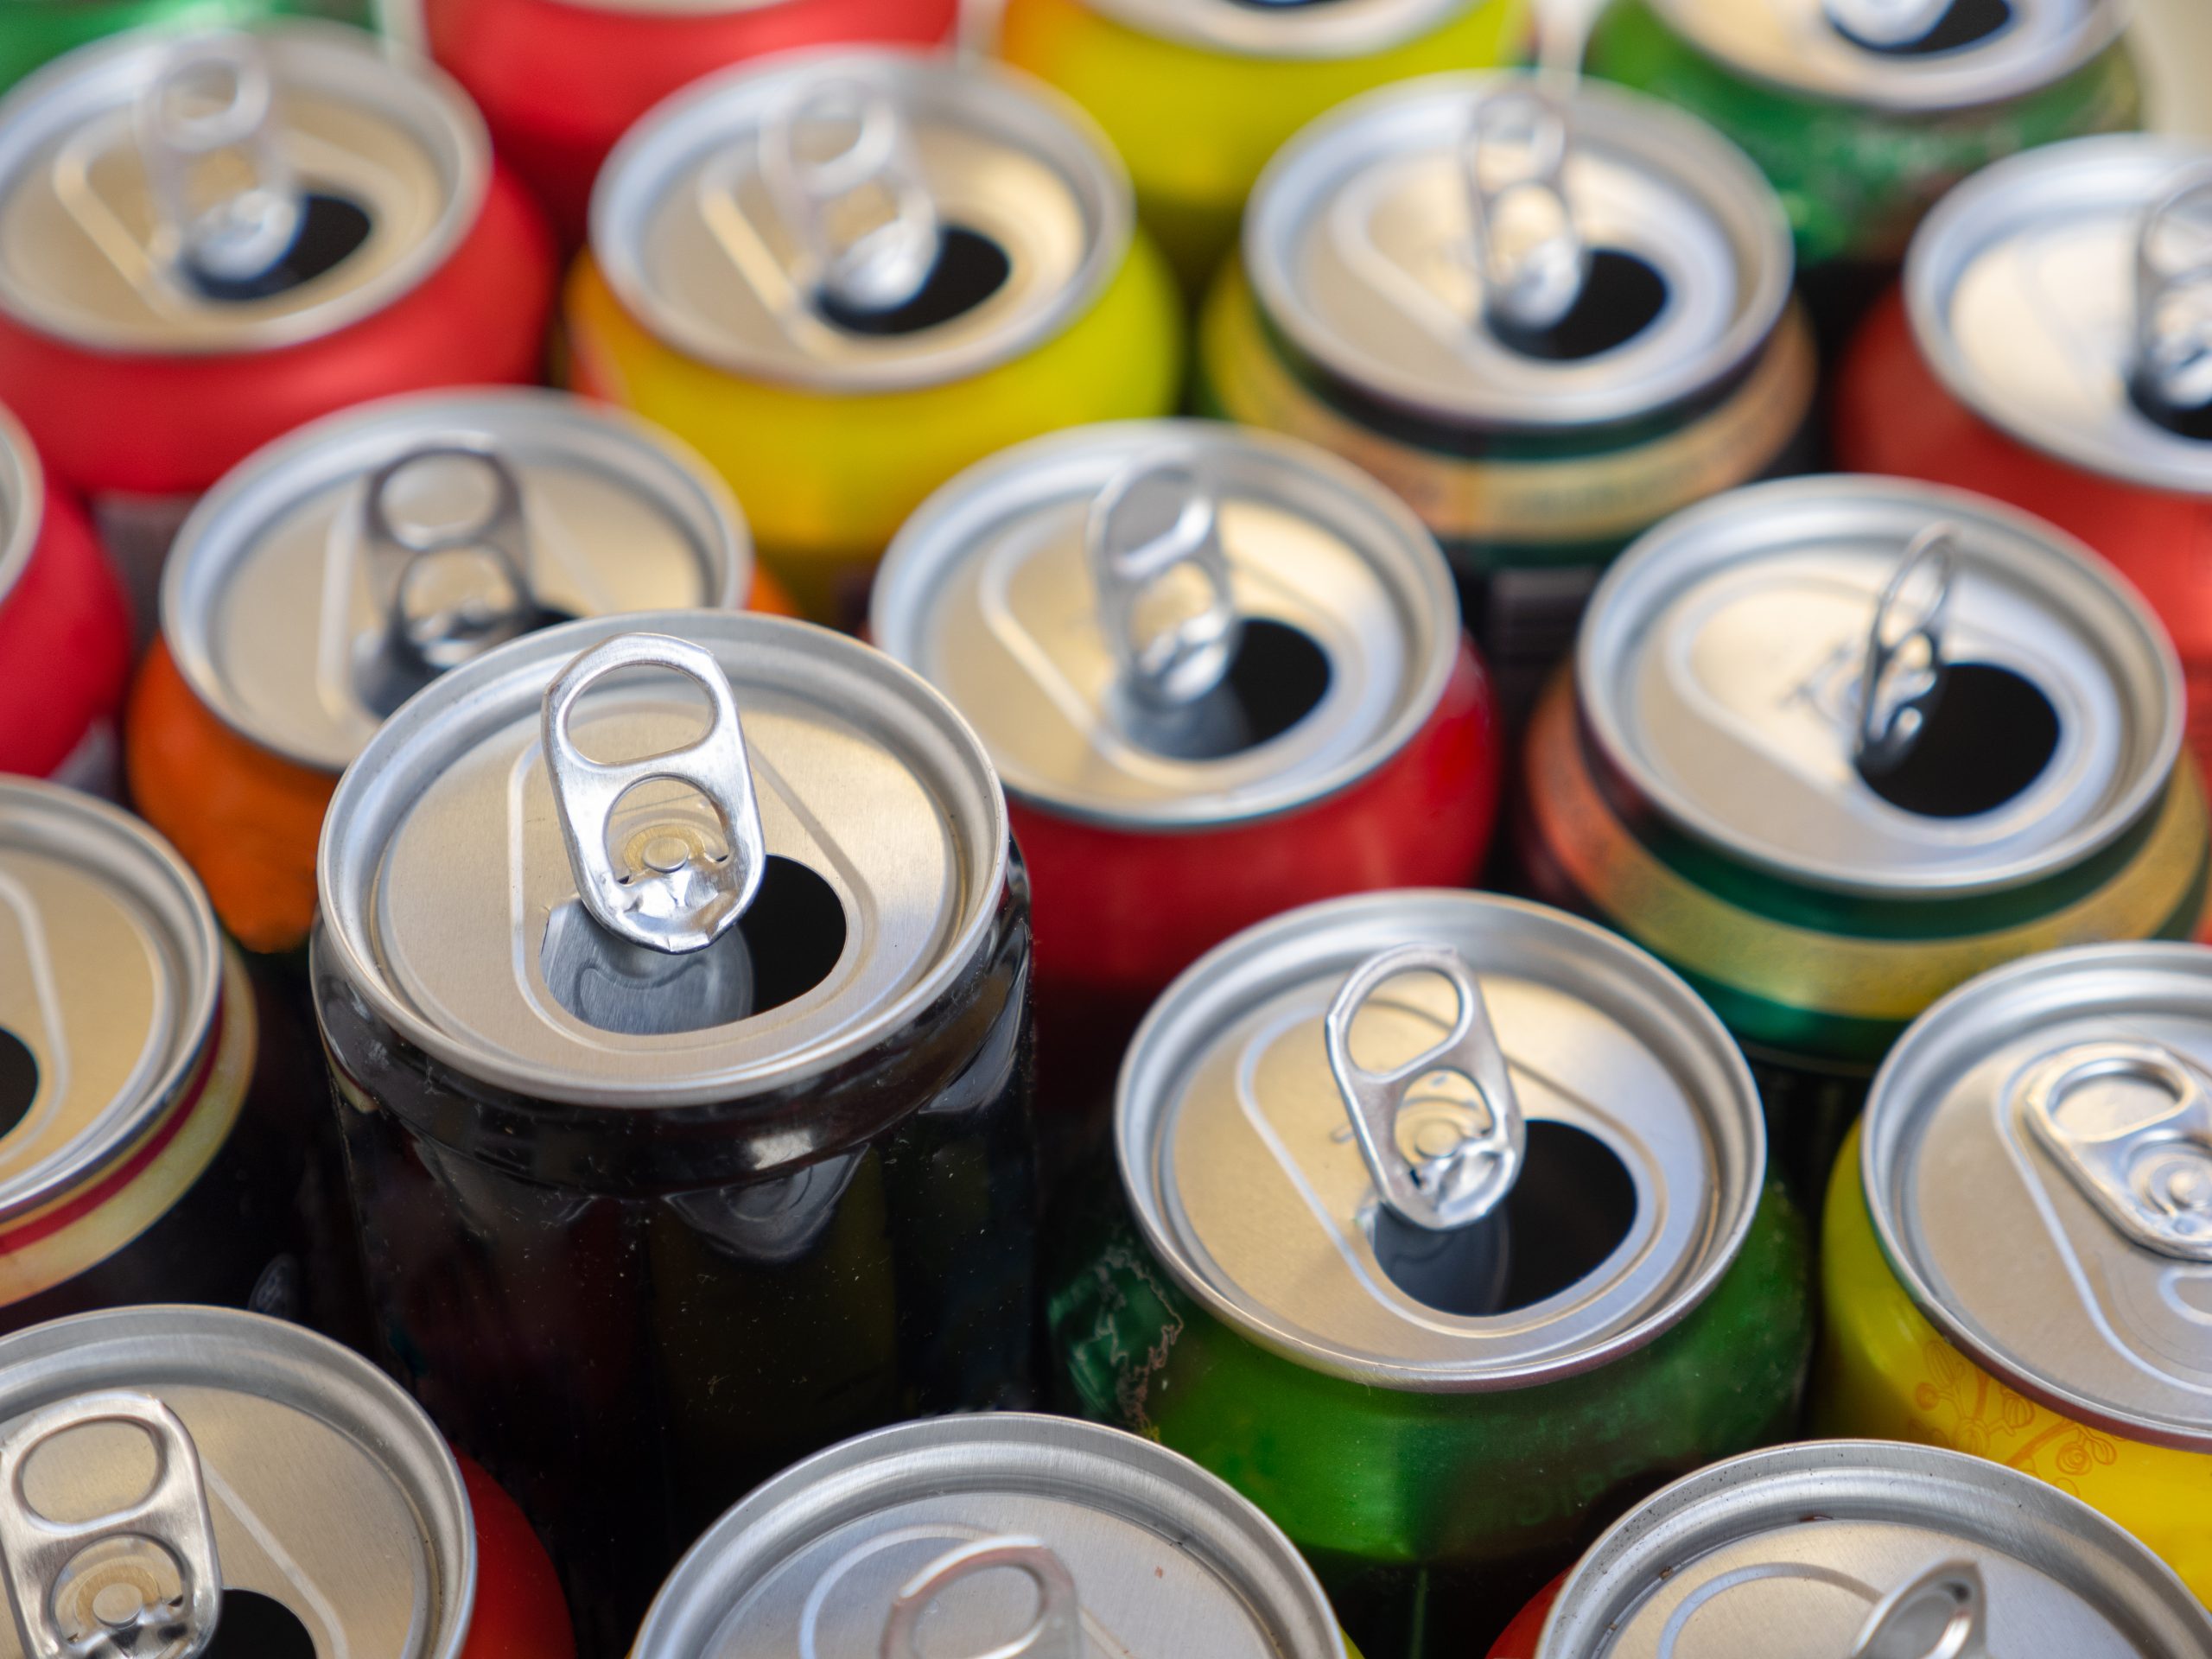 AMP lodges plans for drinks can factory in Newtownabbey